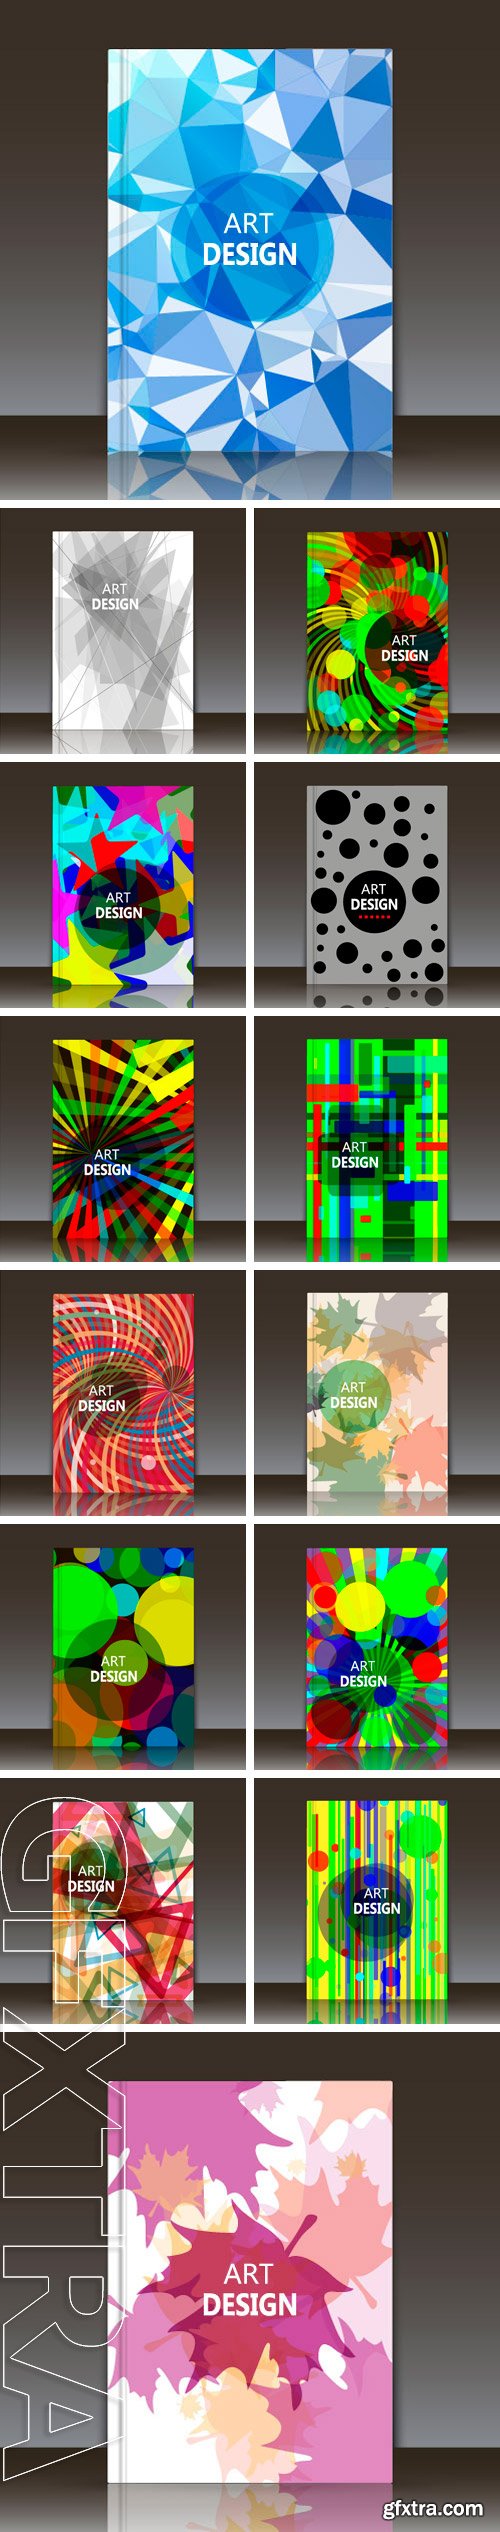 Stock Vectors - Abstract composition, geometric shapes, Brochures, background